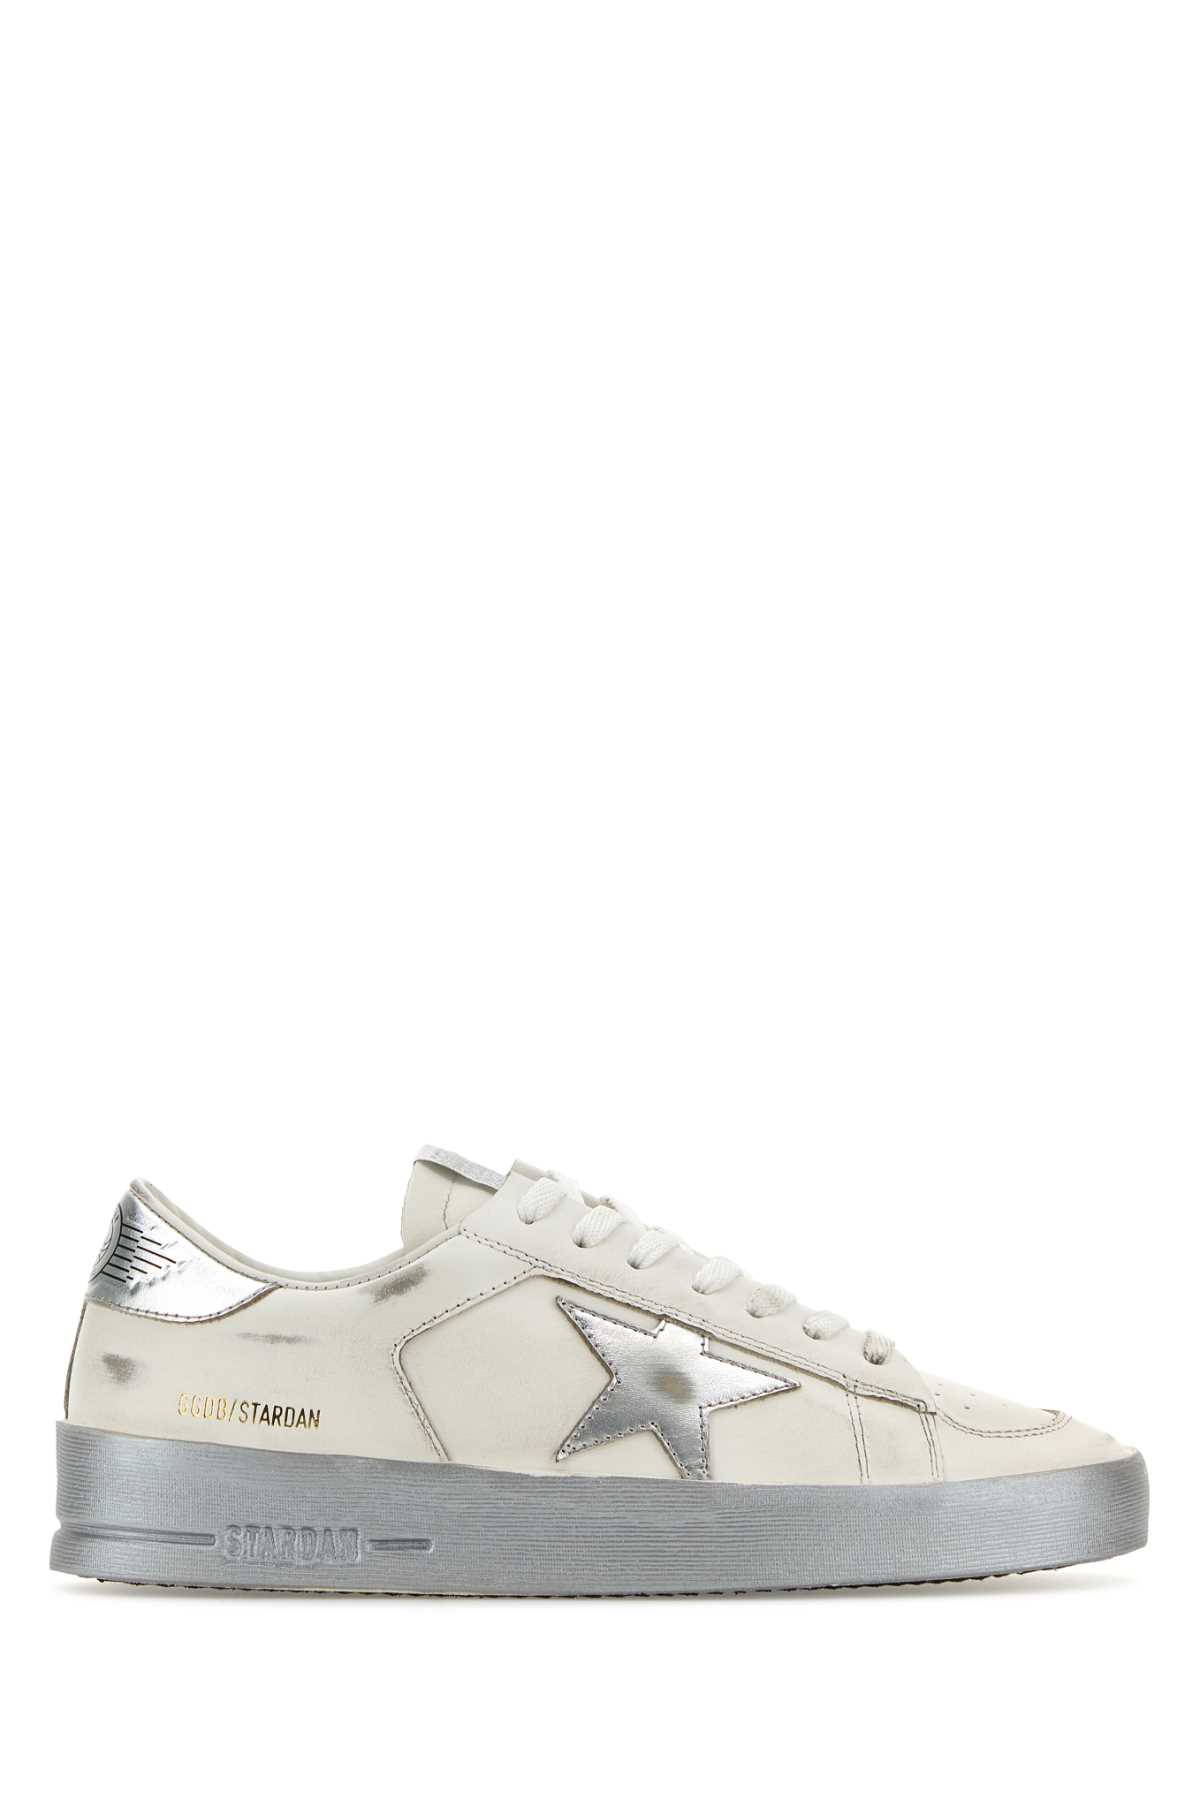 Golden Goose White Leather Stardan Sneakers In Neutral